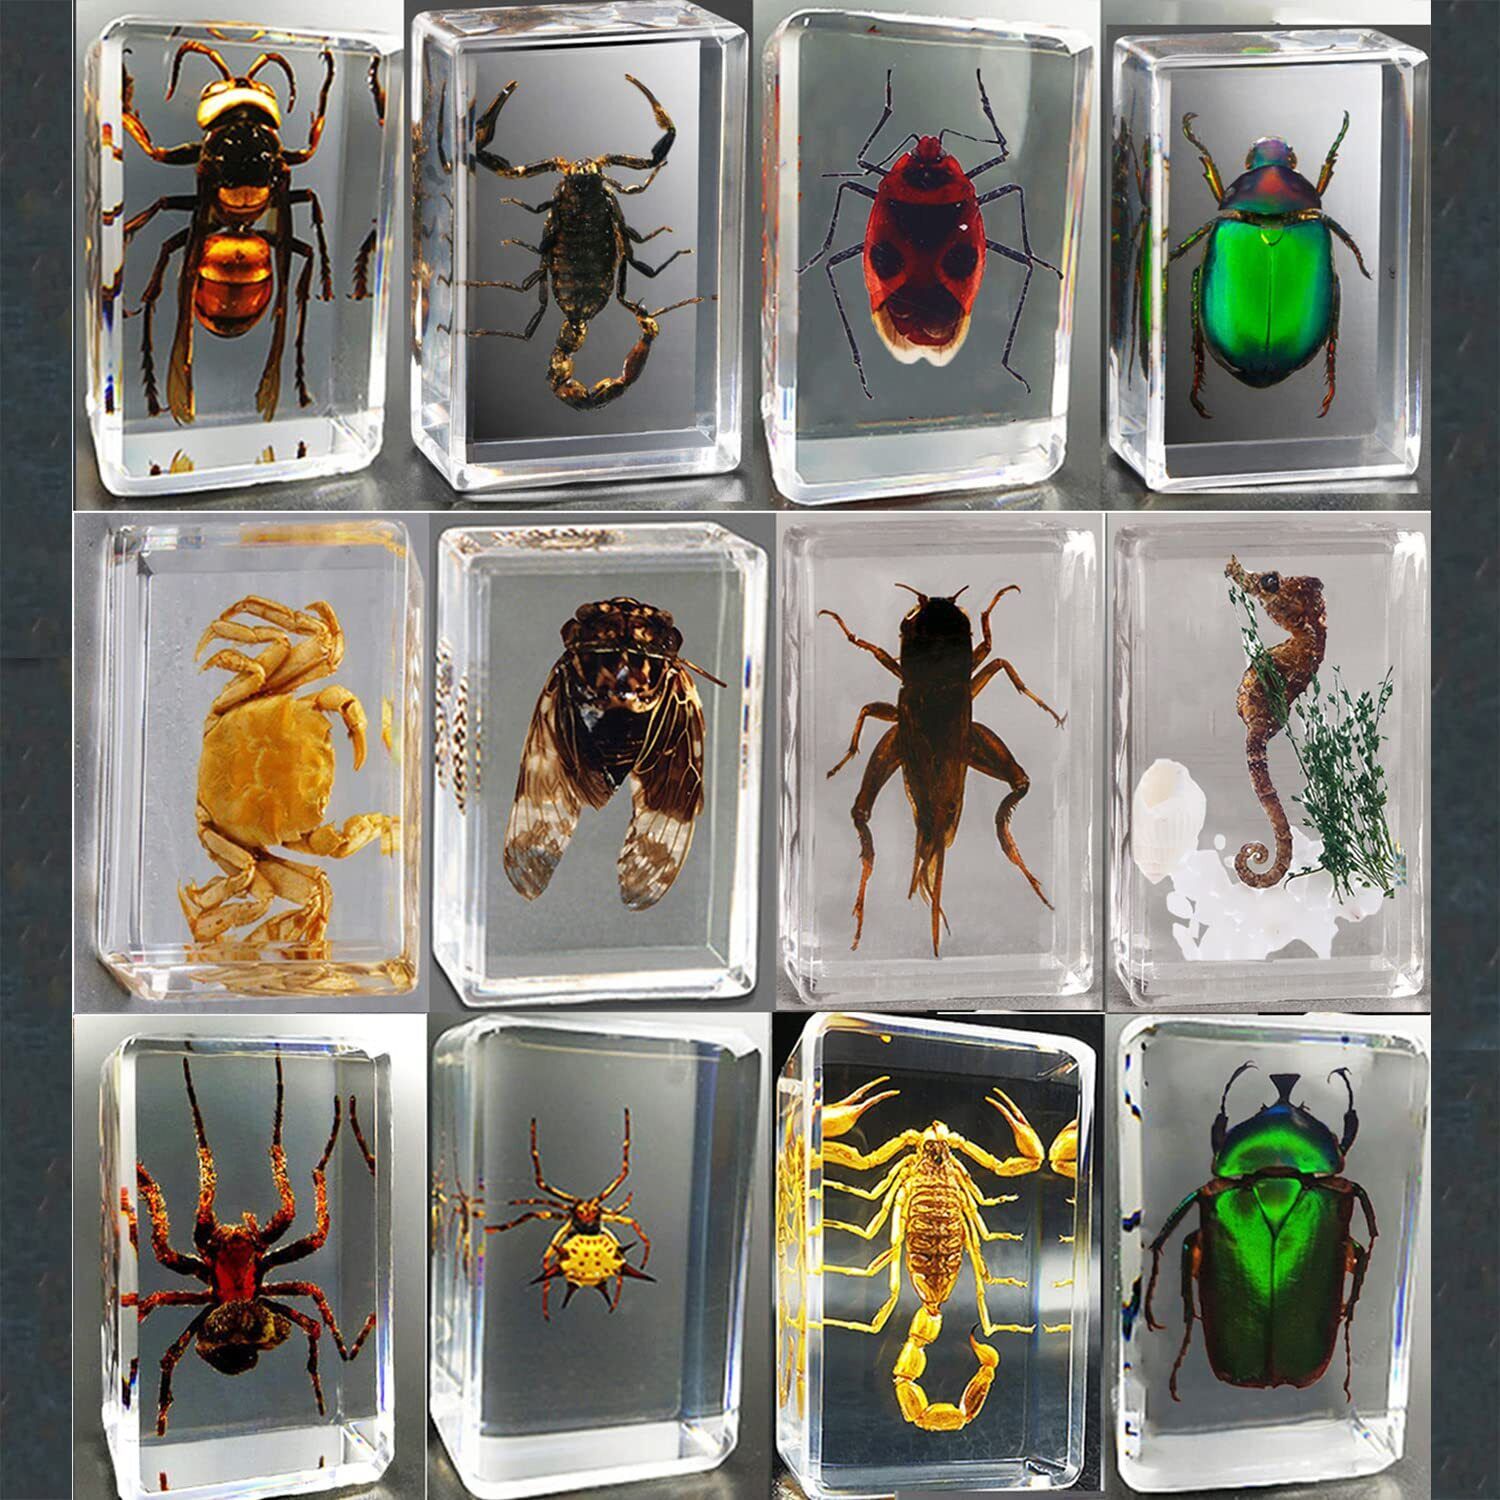 CXUEMH Clear Insect Specimens 12 Pcs Real Animal Specimen Bugs Resin Bug Coll...